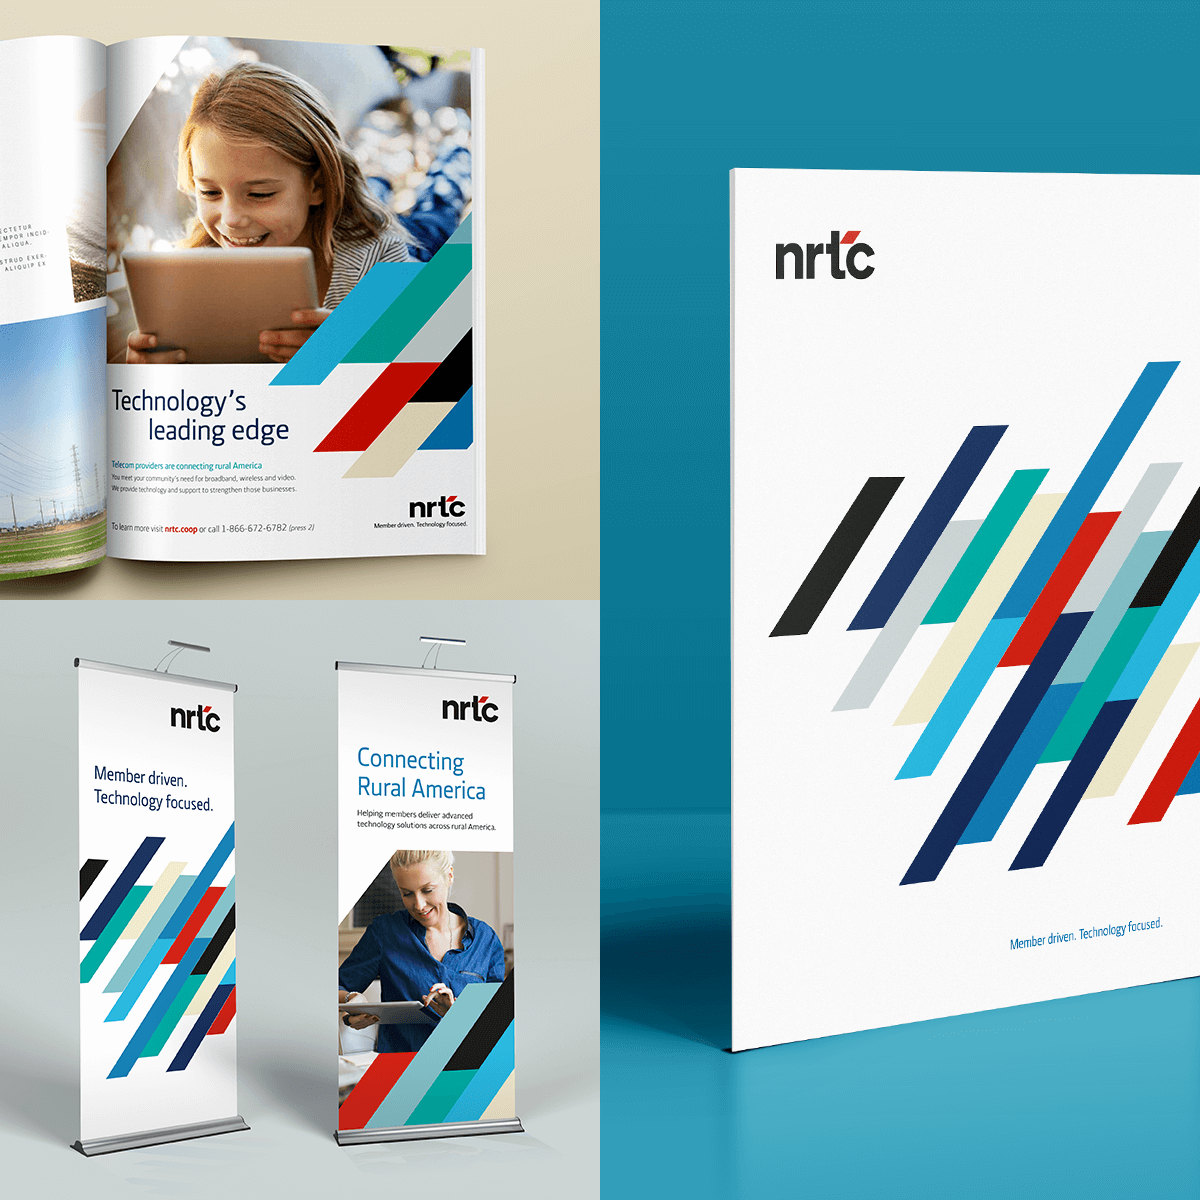 NRTC brand collateral materials including magazine, brochure and tradeshow booth banners.